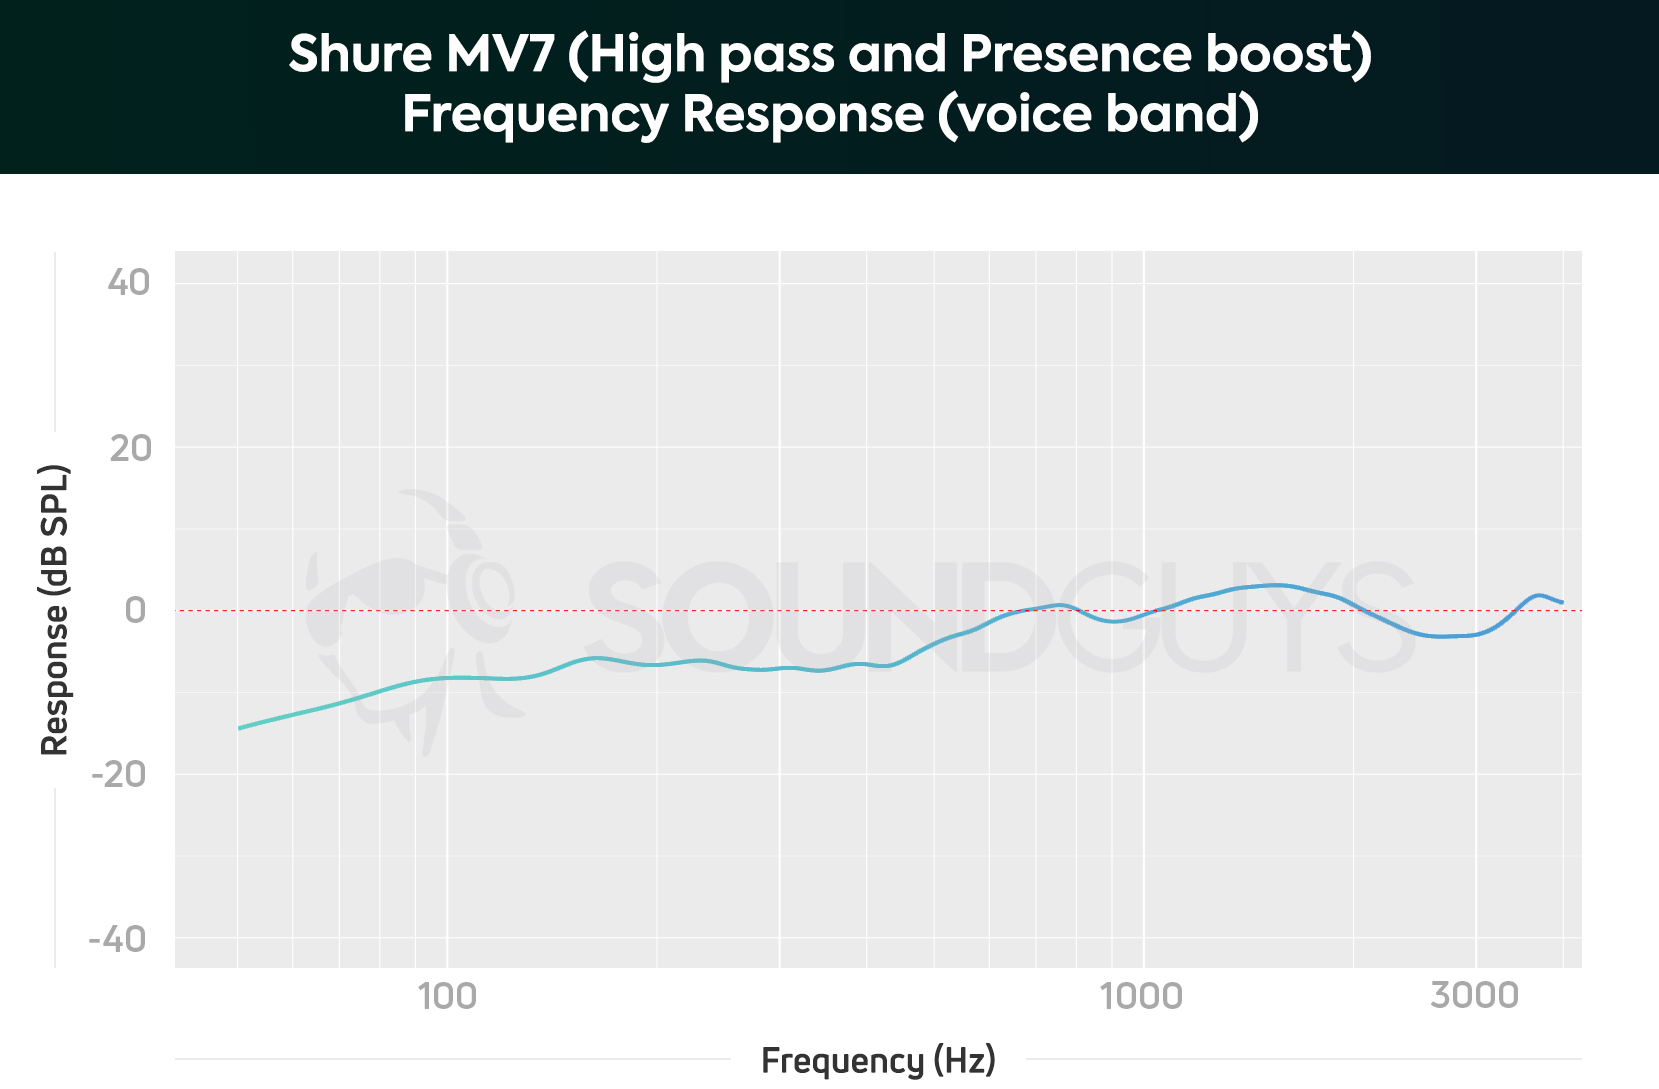 The Shure MV7 voice band frequency response with the "High pass and presence boost" setting enabled; low frequency notes are half as loud as upper-midrange and treble frequency sounds. Sub-bass notes are more aggressively de-emphasized than midrange and bass notes.